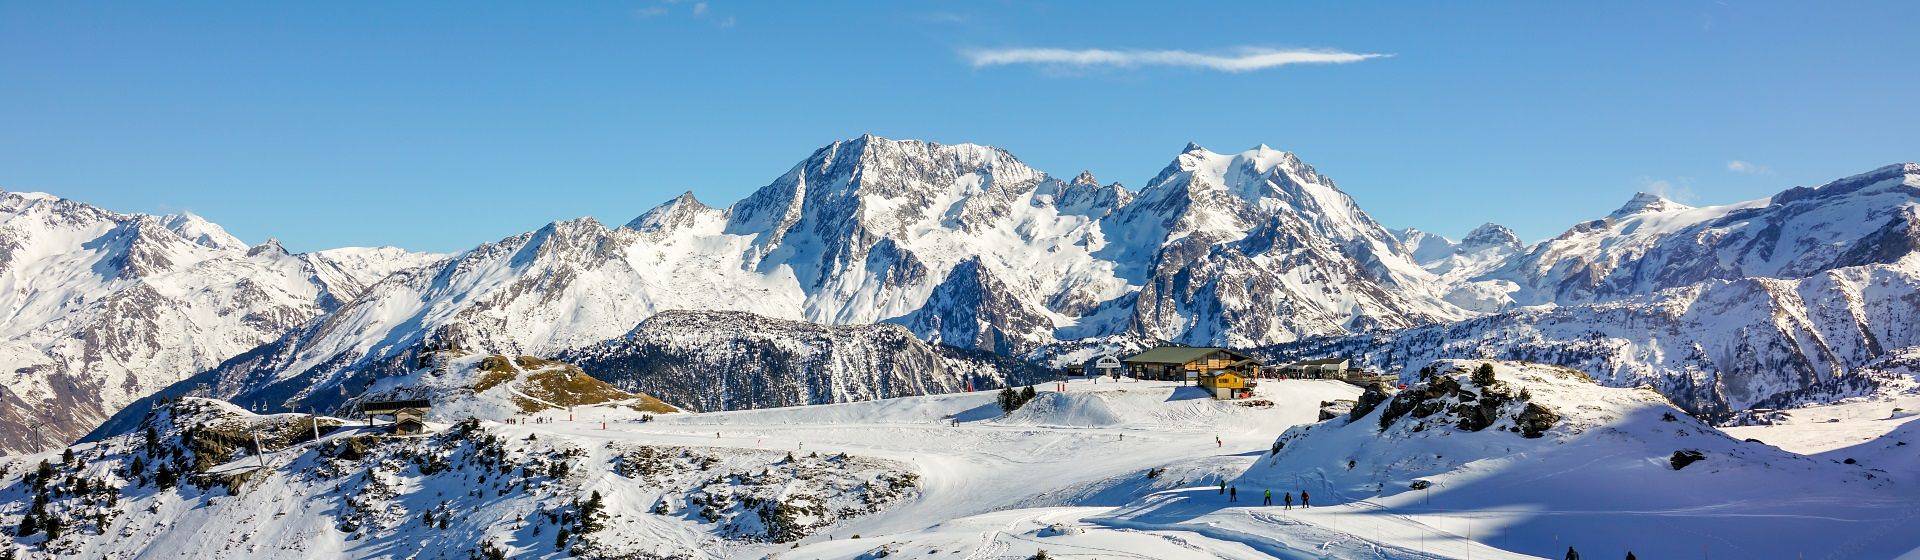 Holidays to Courchevel Image